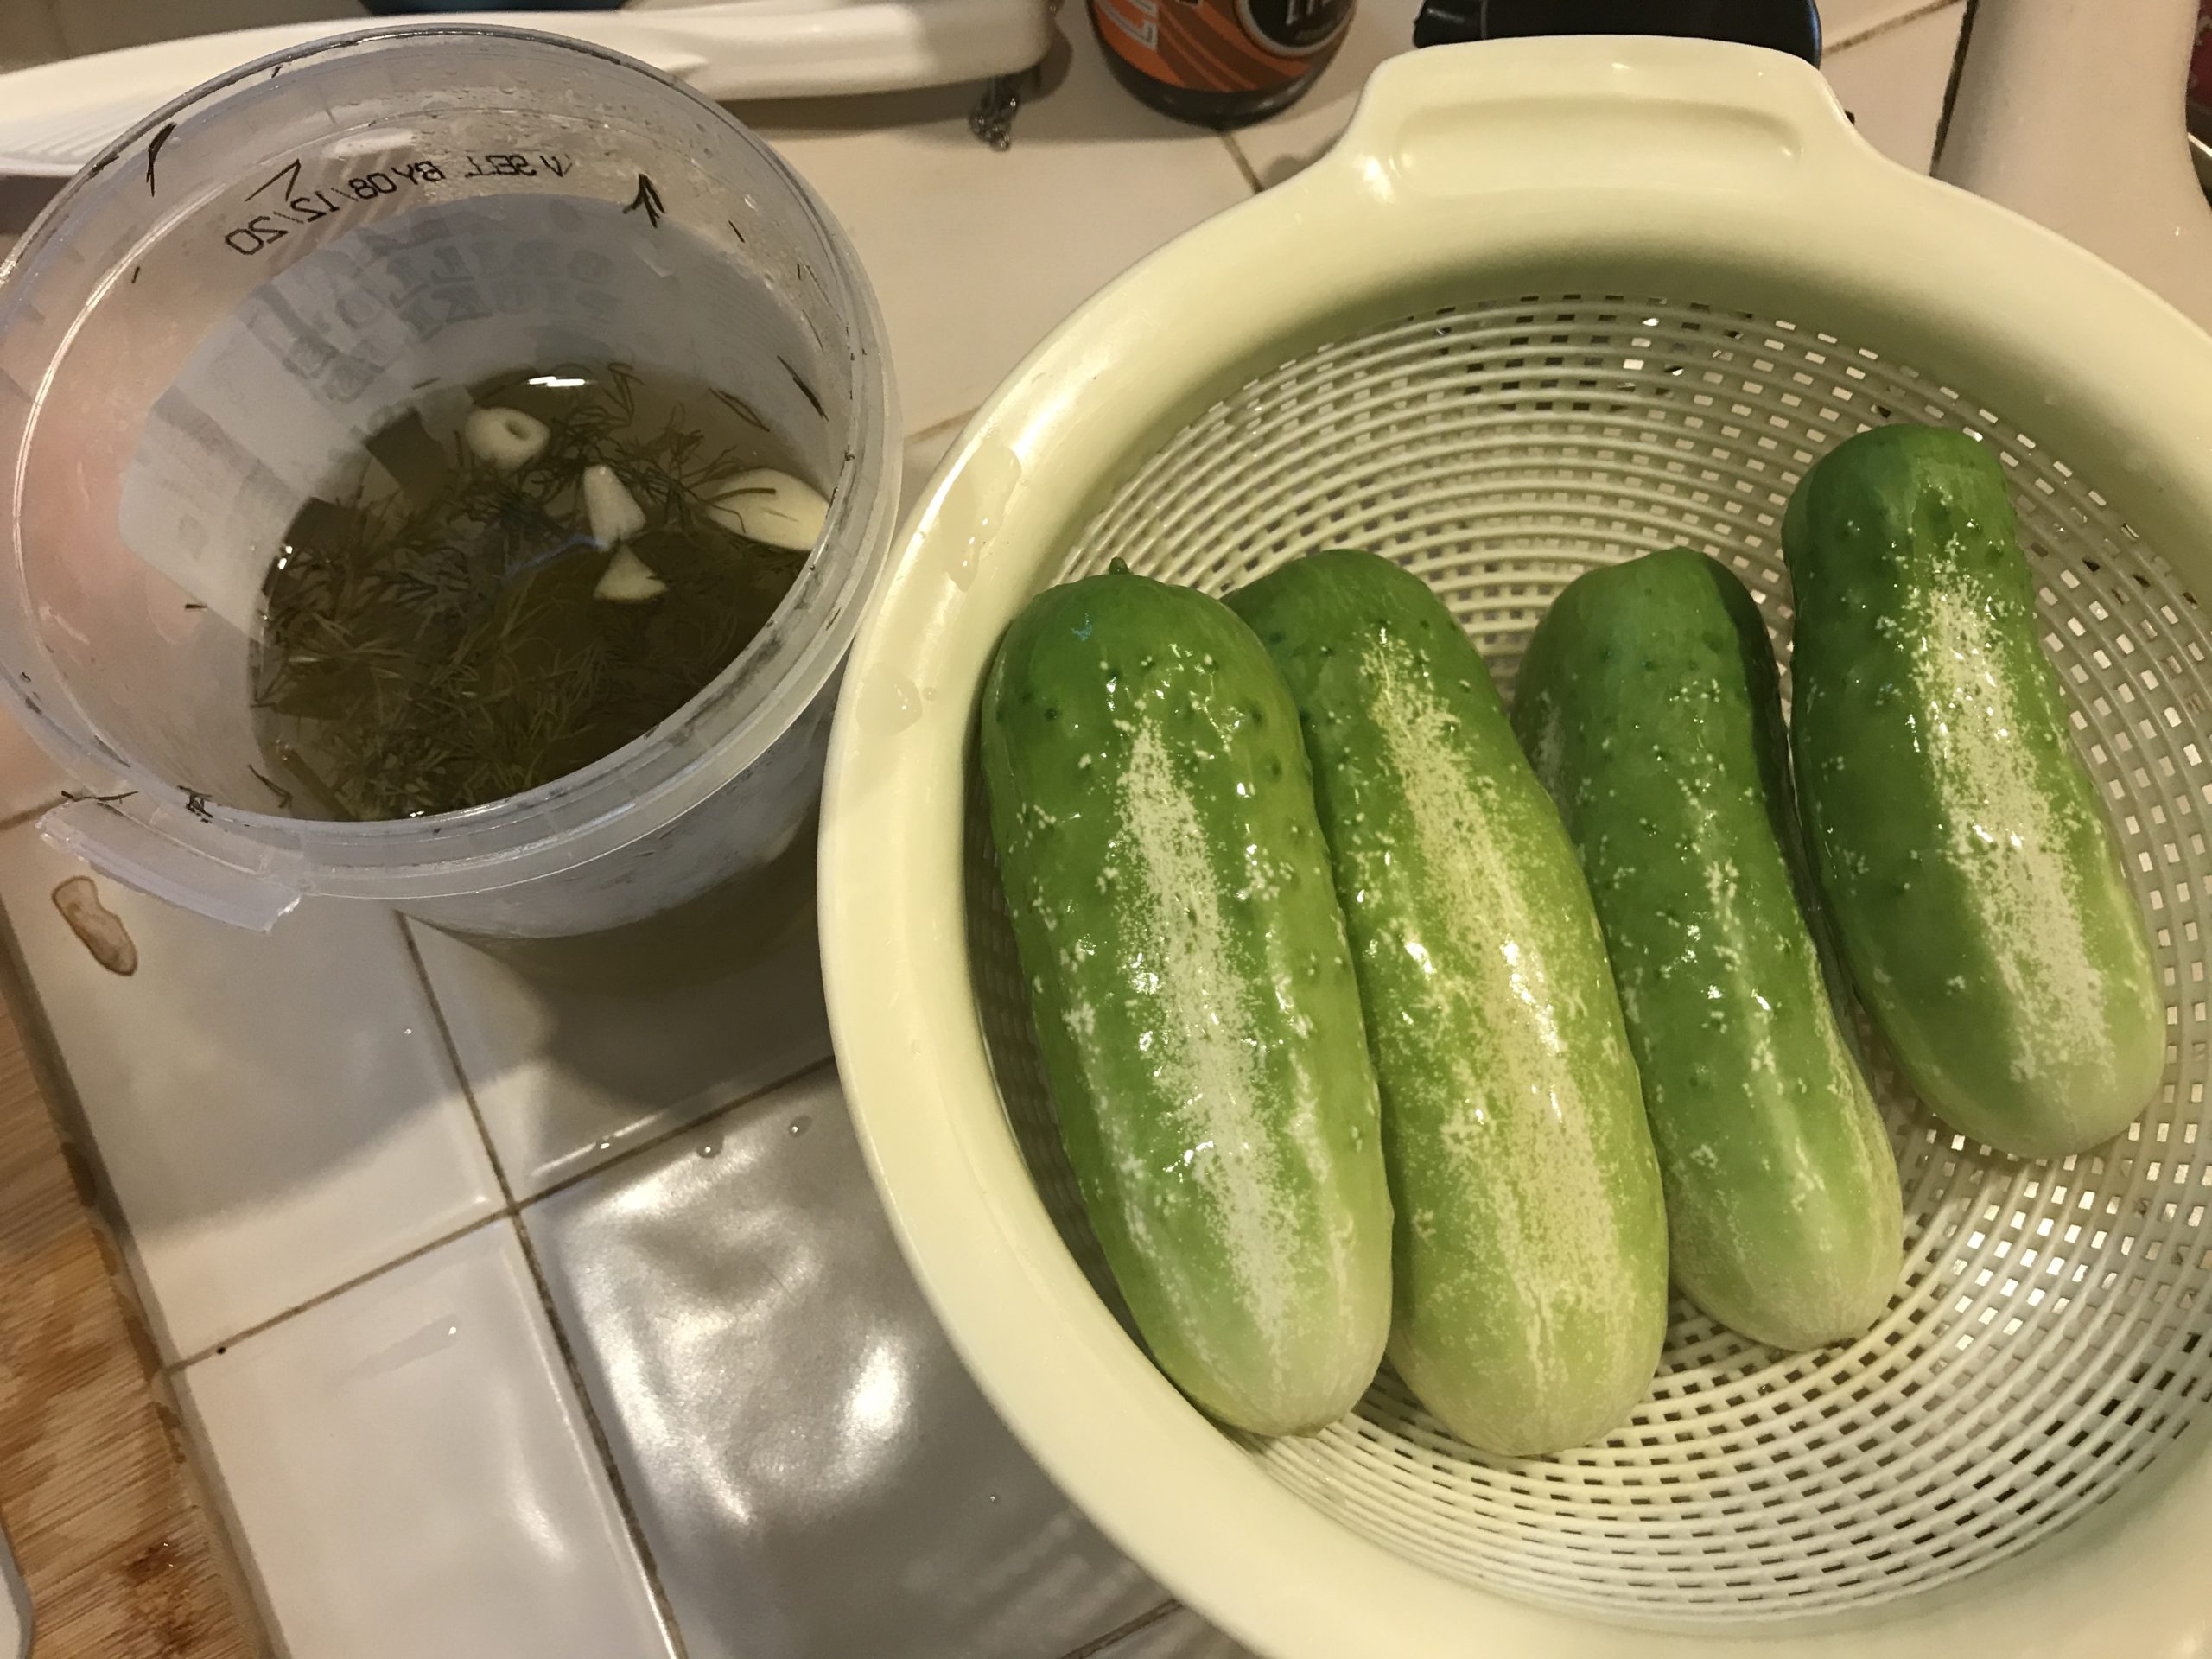 Pickling first cucumber 🥒 harvest – YHK daily photos